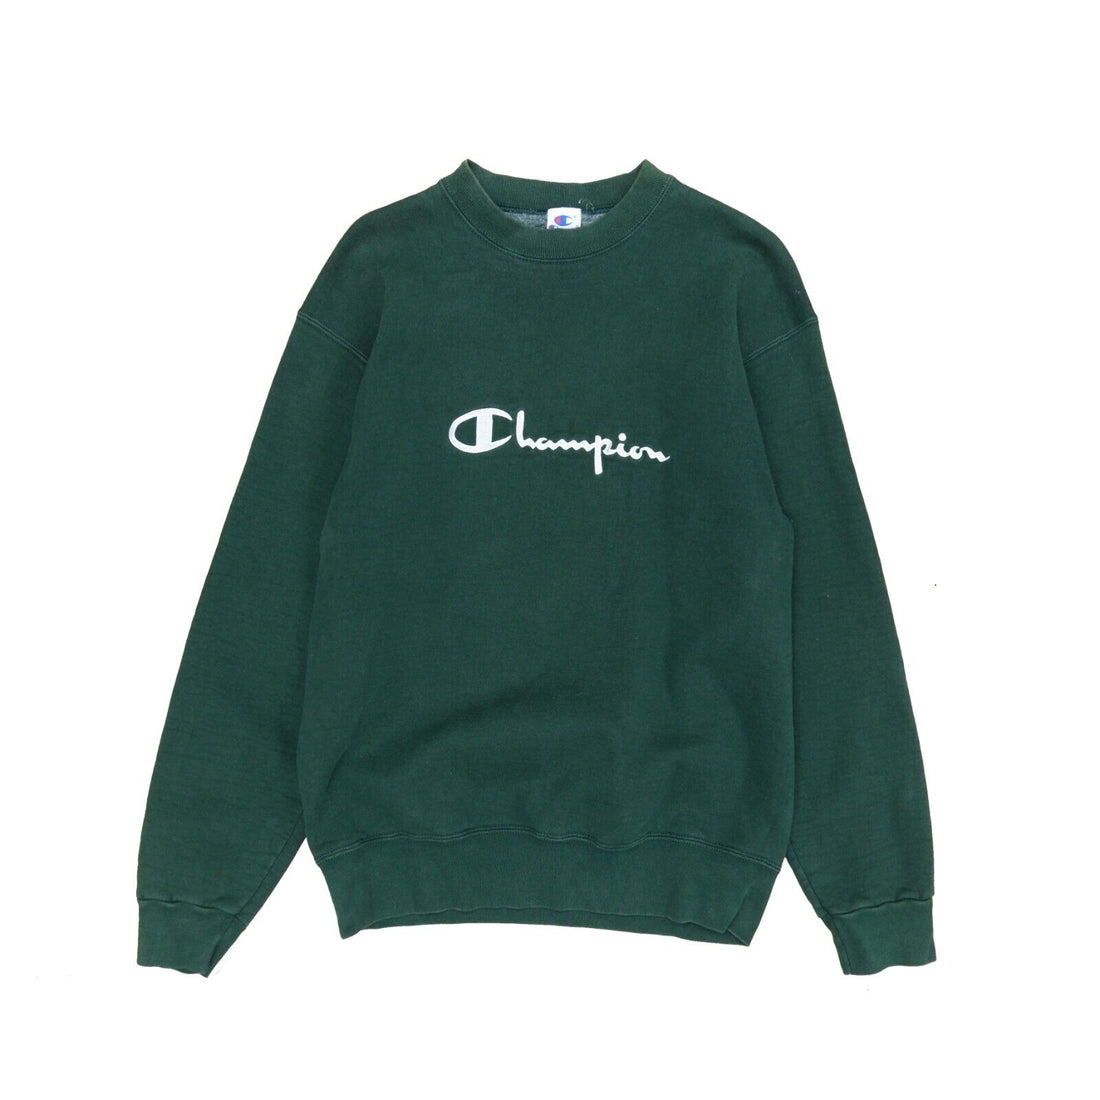 Vintage Champion Spell Out Sweatshirt Crewneck Size Large Green Embroidered